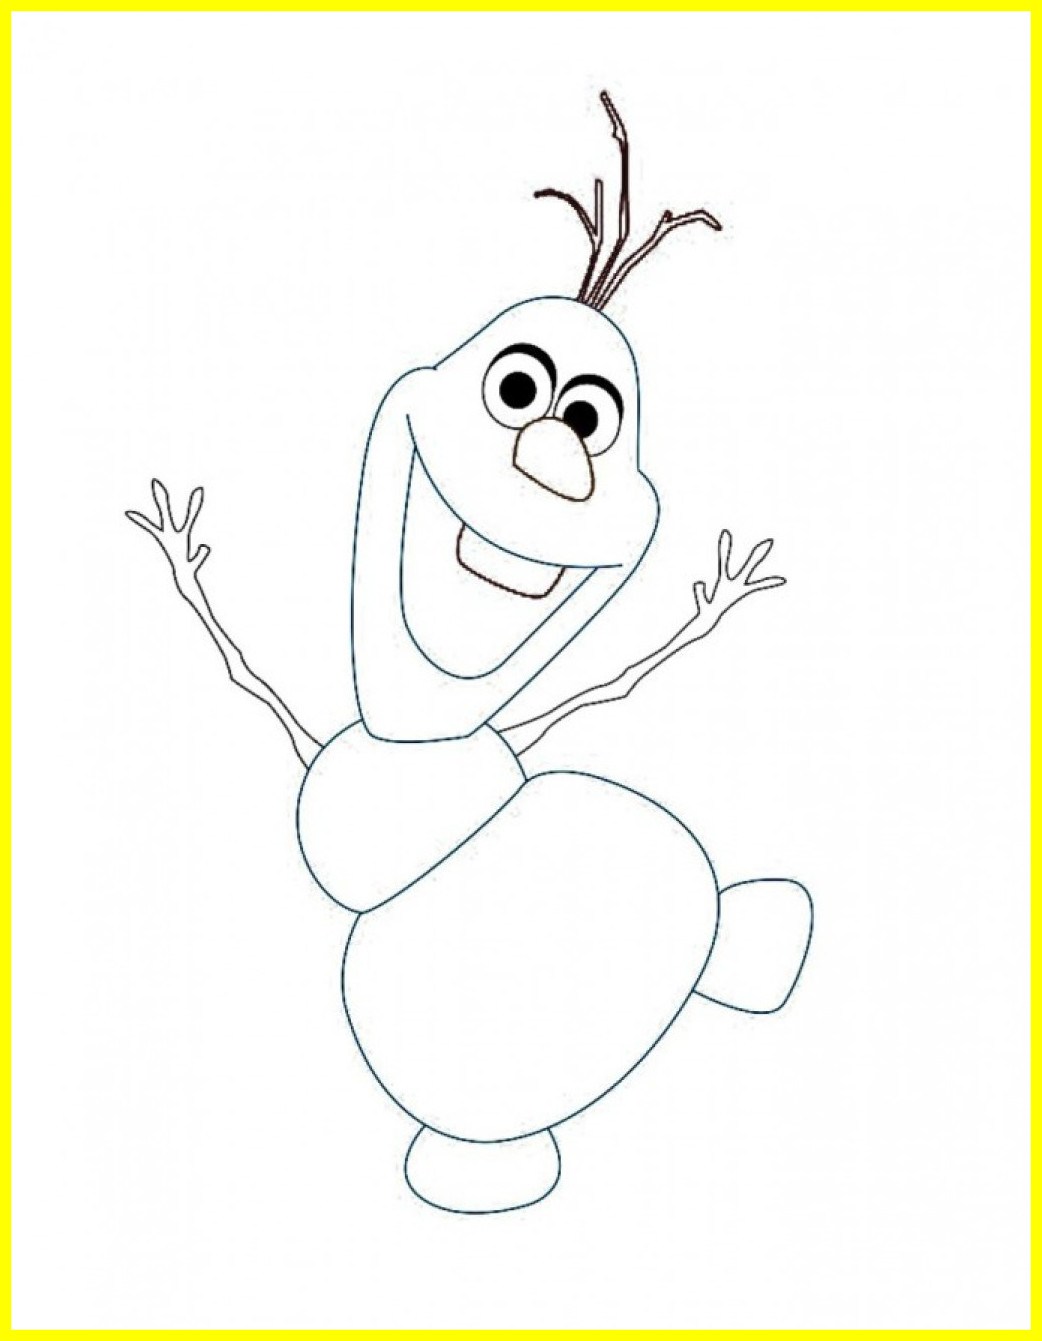 Frozen Olaf Coloring Pages at GetDrawings | Free download